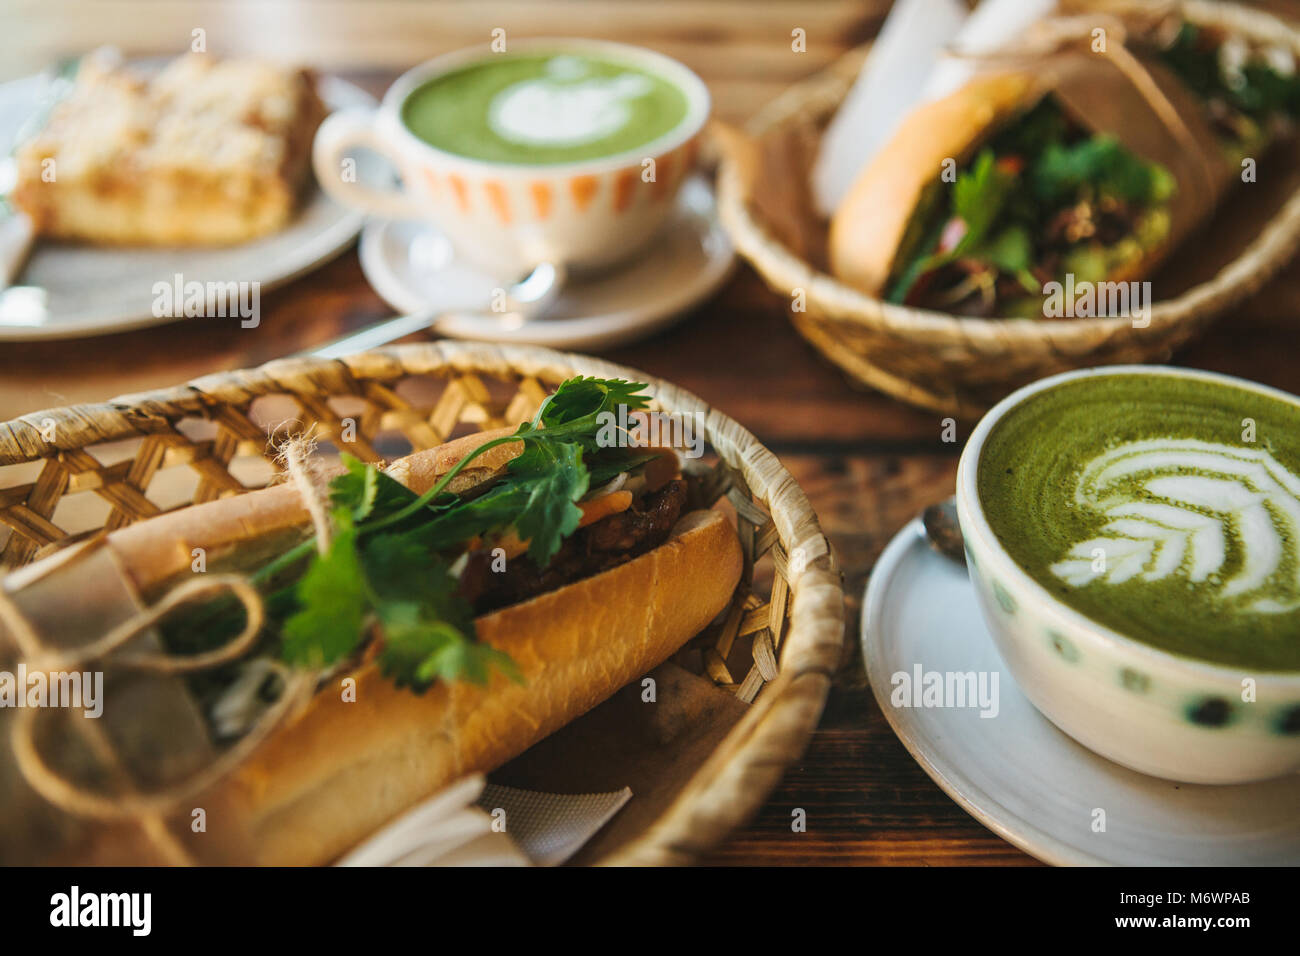 A lot of different food on the table. Healthy breakfast in the restaurant: cups of green tea with milk called Matcha, dessert and sandwiches with vegetables and herbs on wooden table. Stock Photo